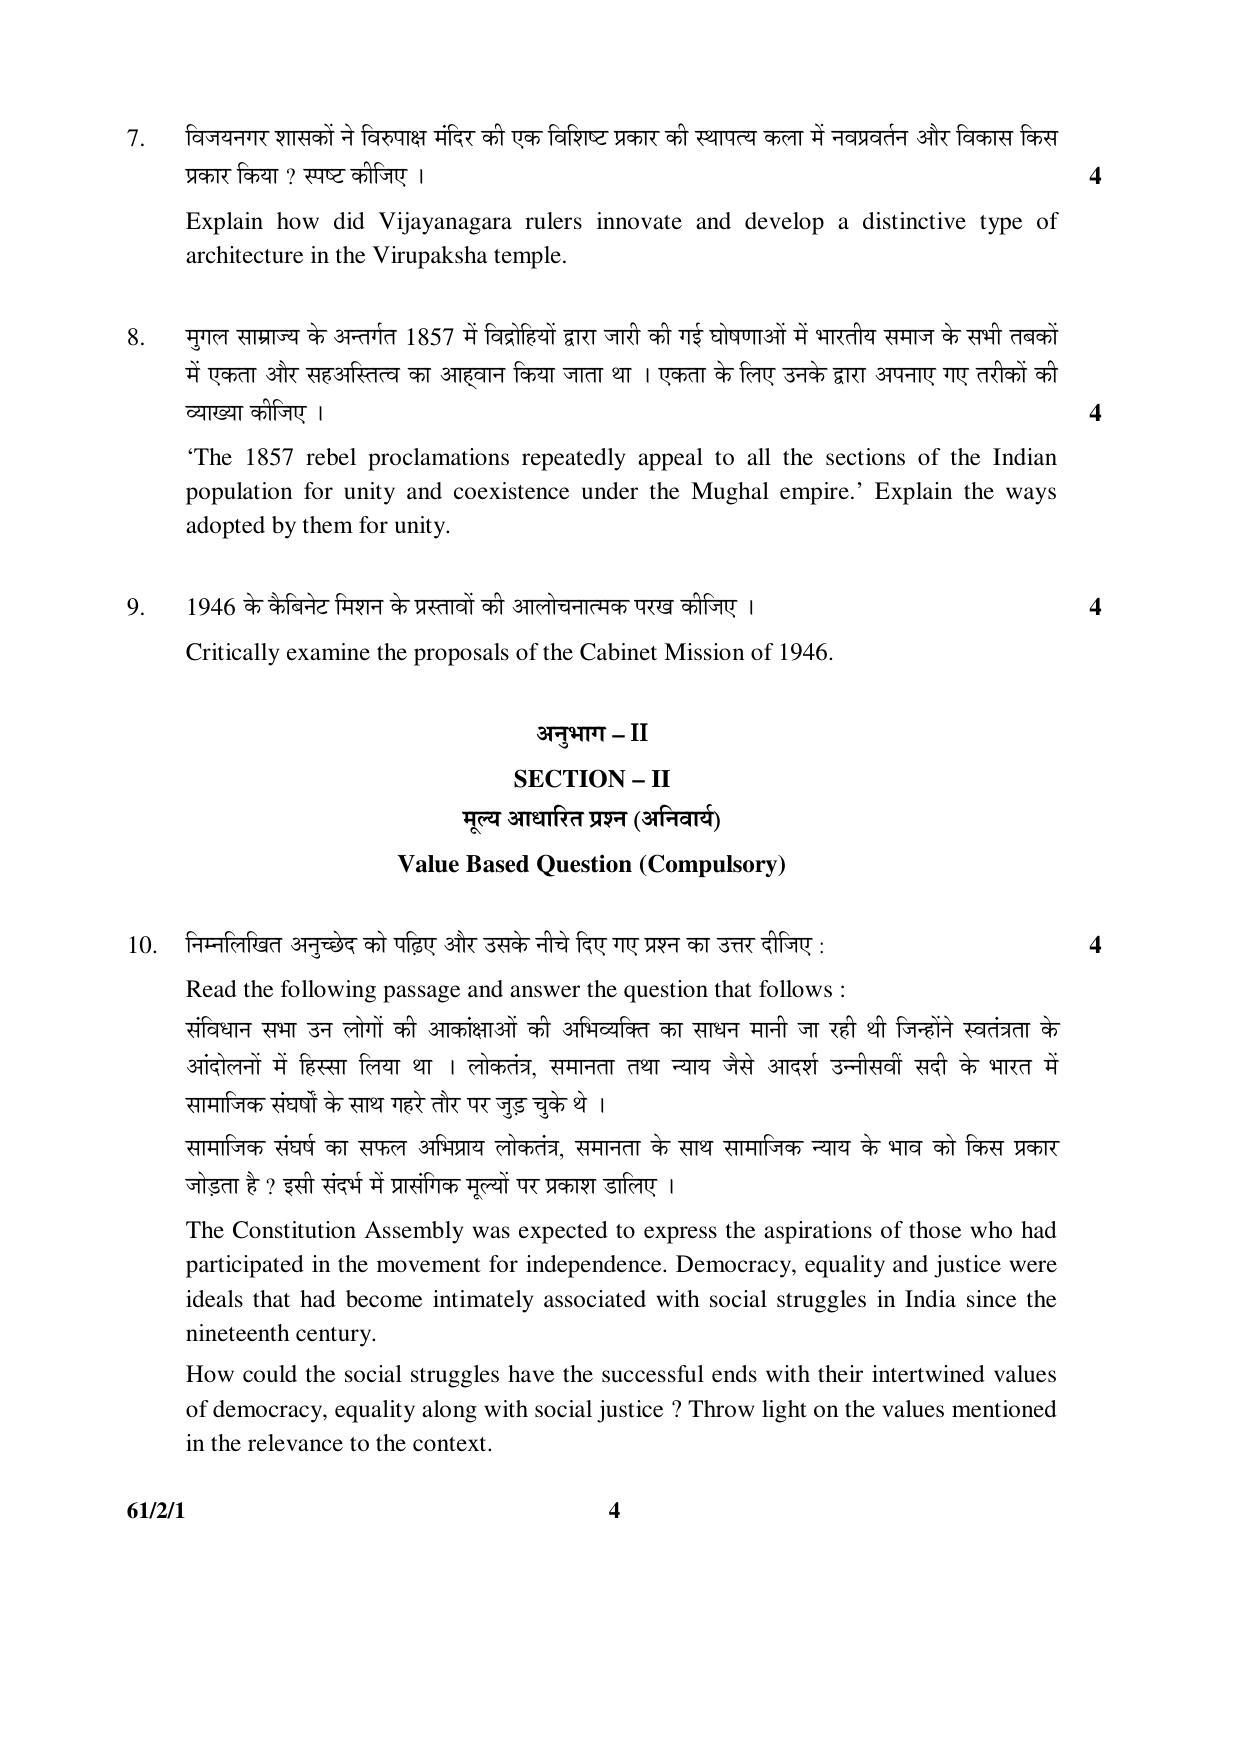 CBSE Class 12 61-2-1 History 2016 Question Paper - Page 4